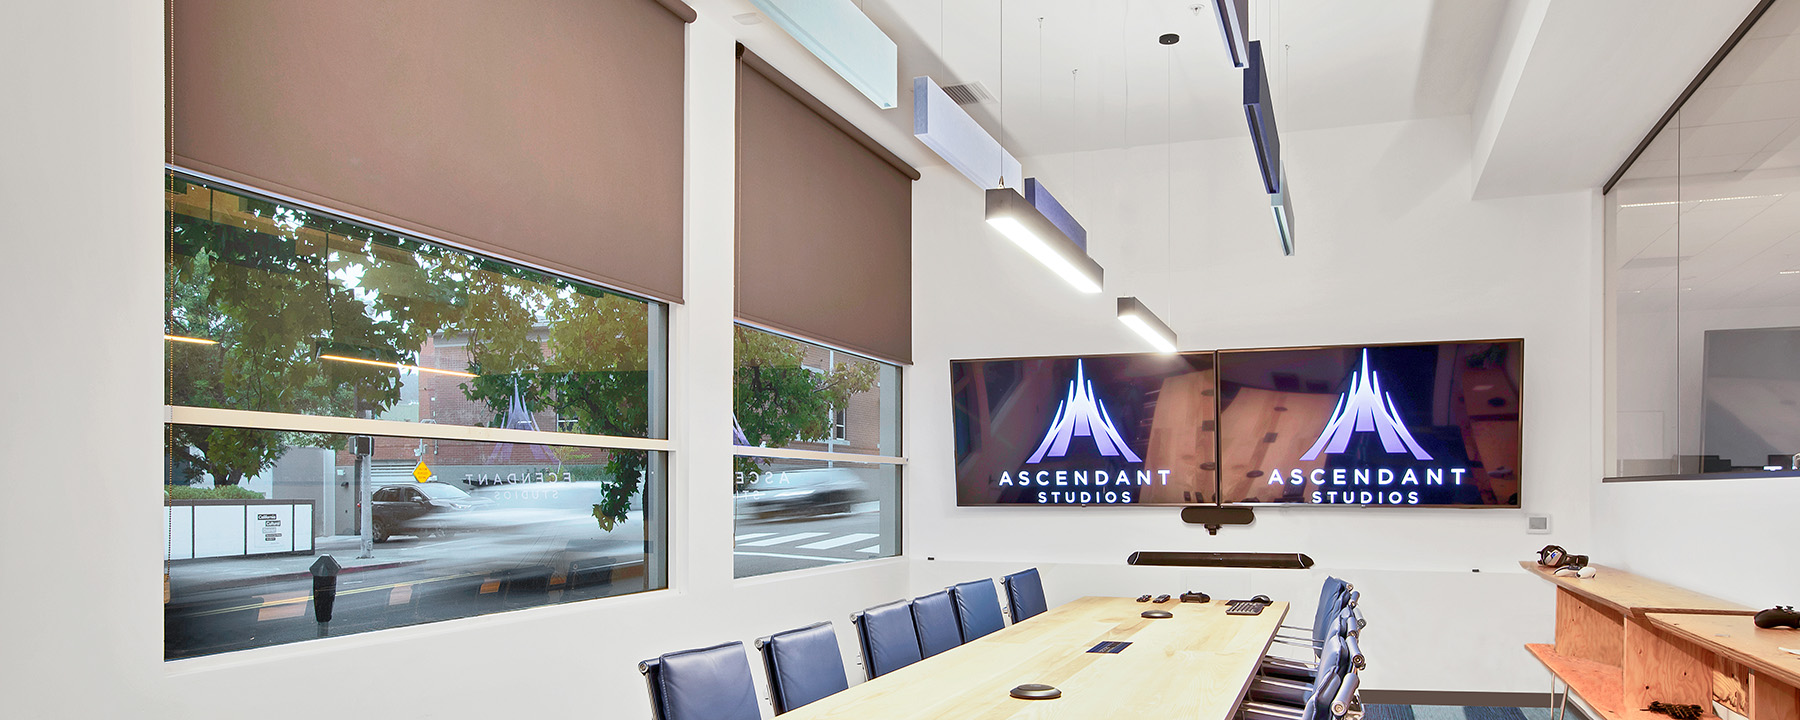 Linear suspension lighting hanging over a conference room table at Ascendent Studios balances with natural light coming through the windows. Shades that can be drawn for video viewing during meetings.